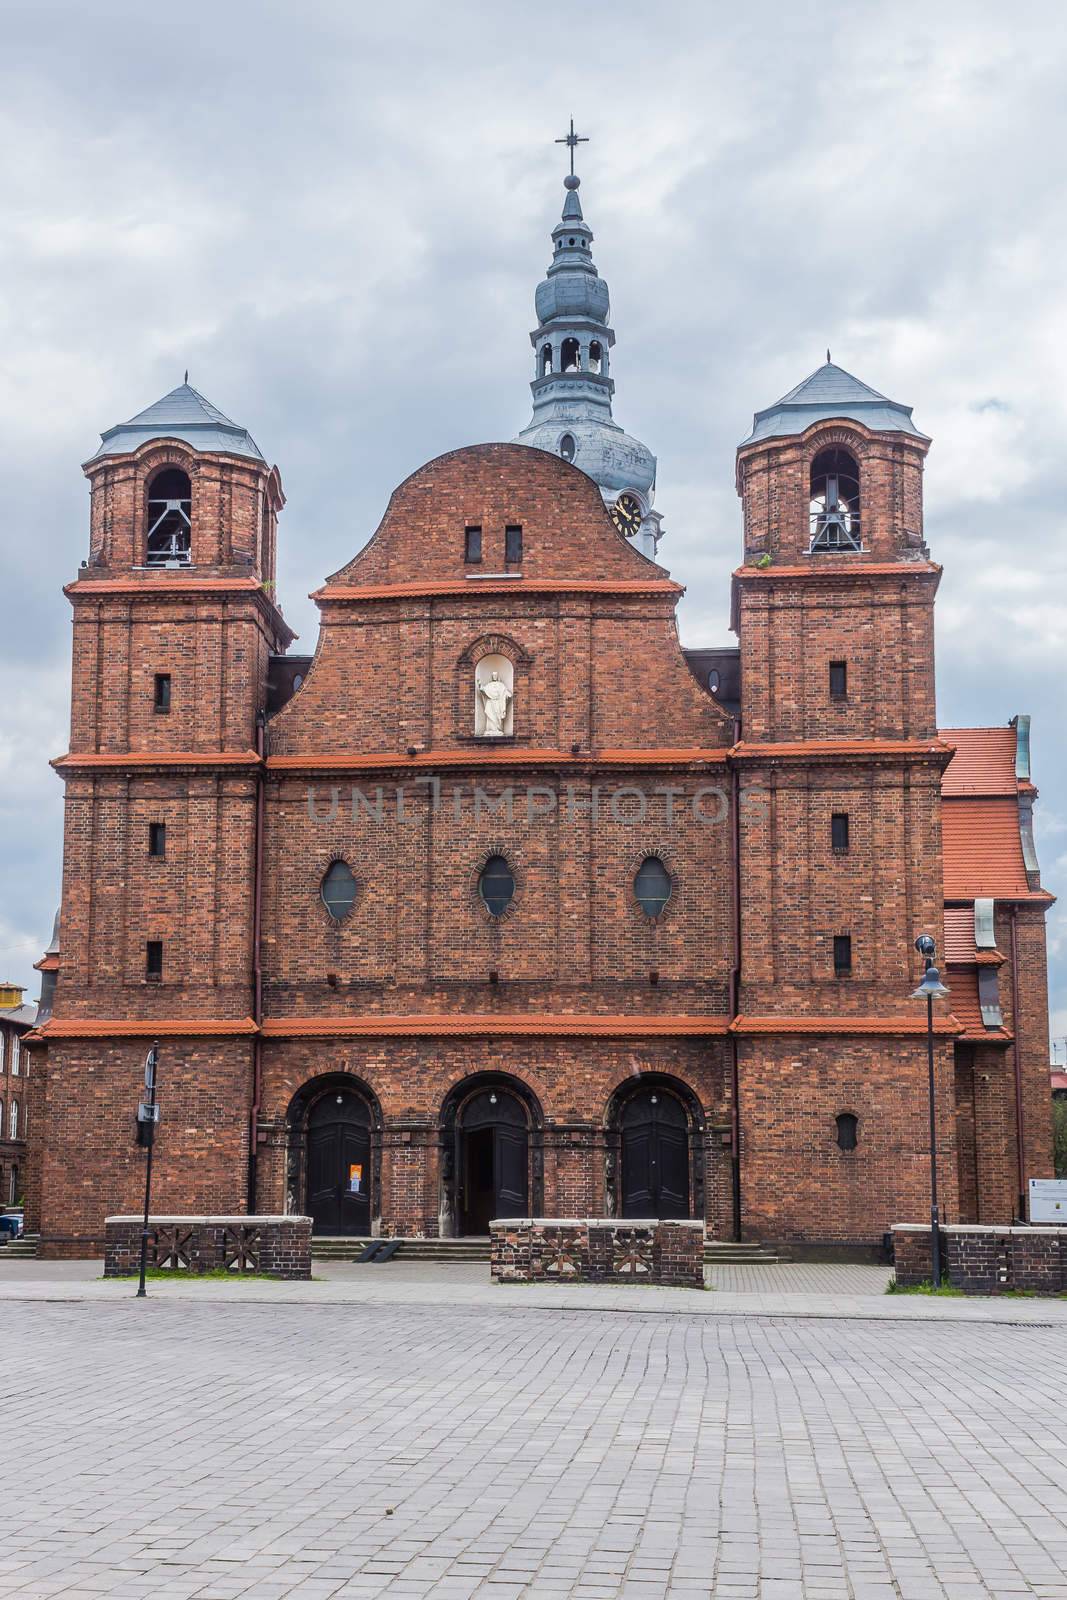 St. Anne's Parish Church in Nikiszowiec, one of the districts of Katowice, Silesia region, Poland. The place is historic coal miners' settlement built between 1908-1918.